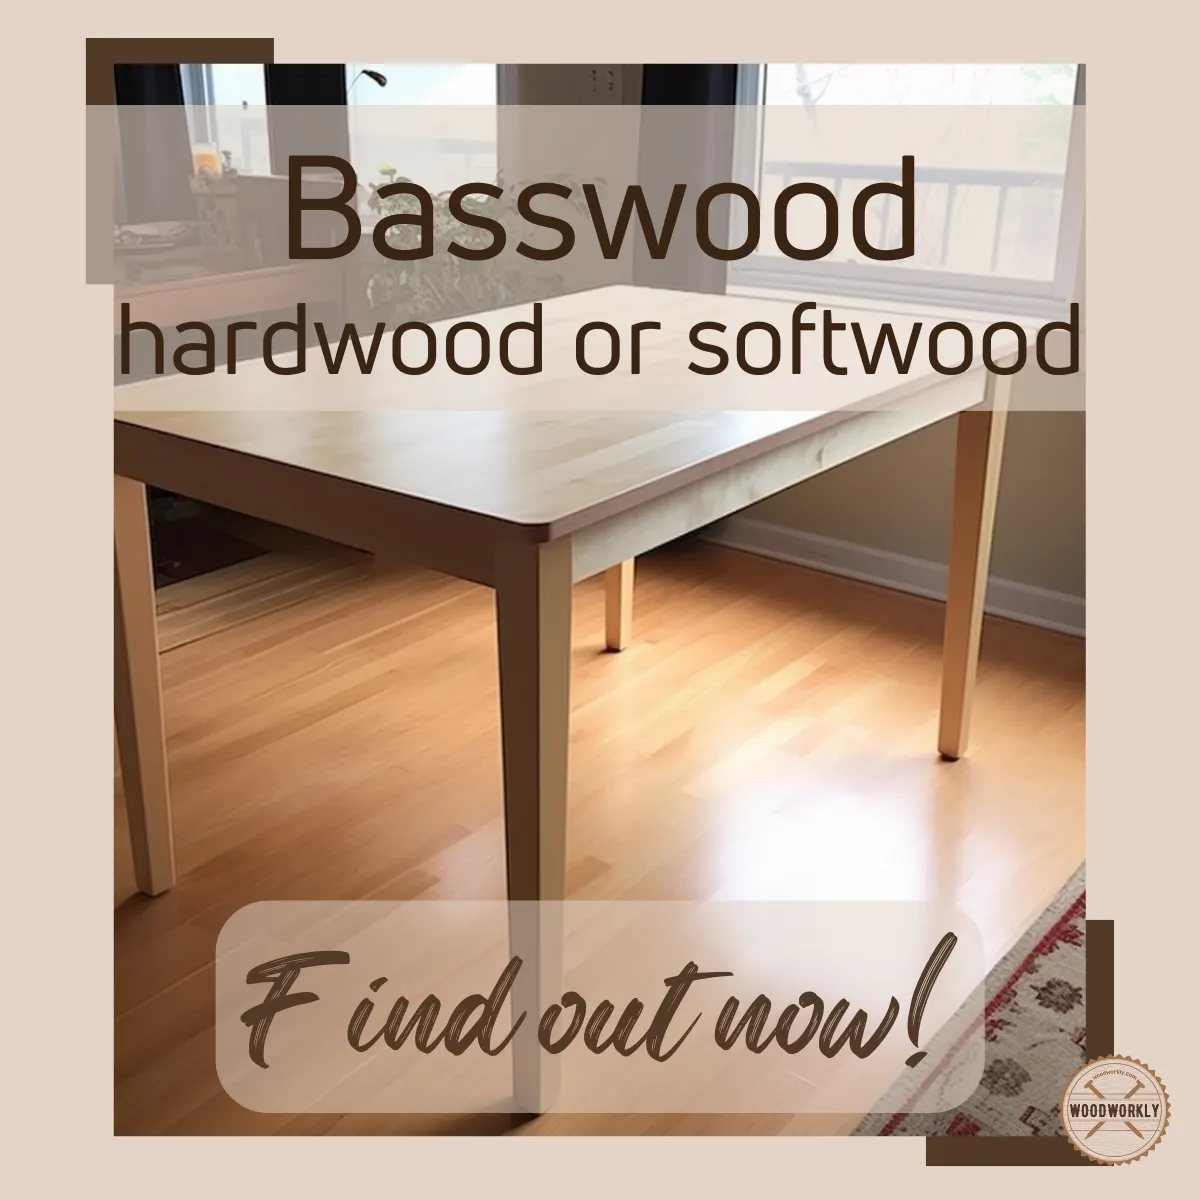 is basswood a hardwood or softwood